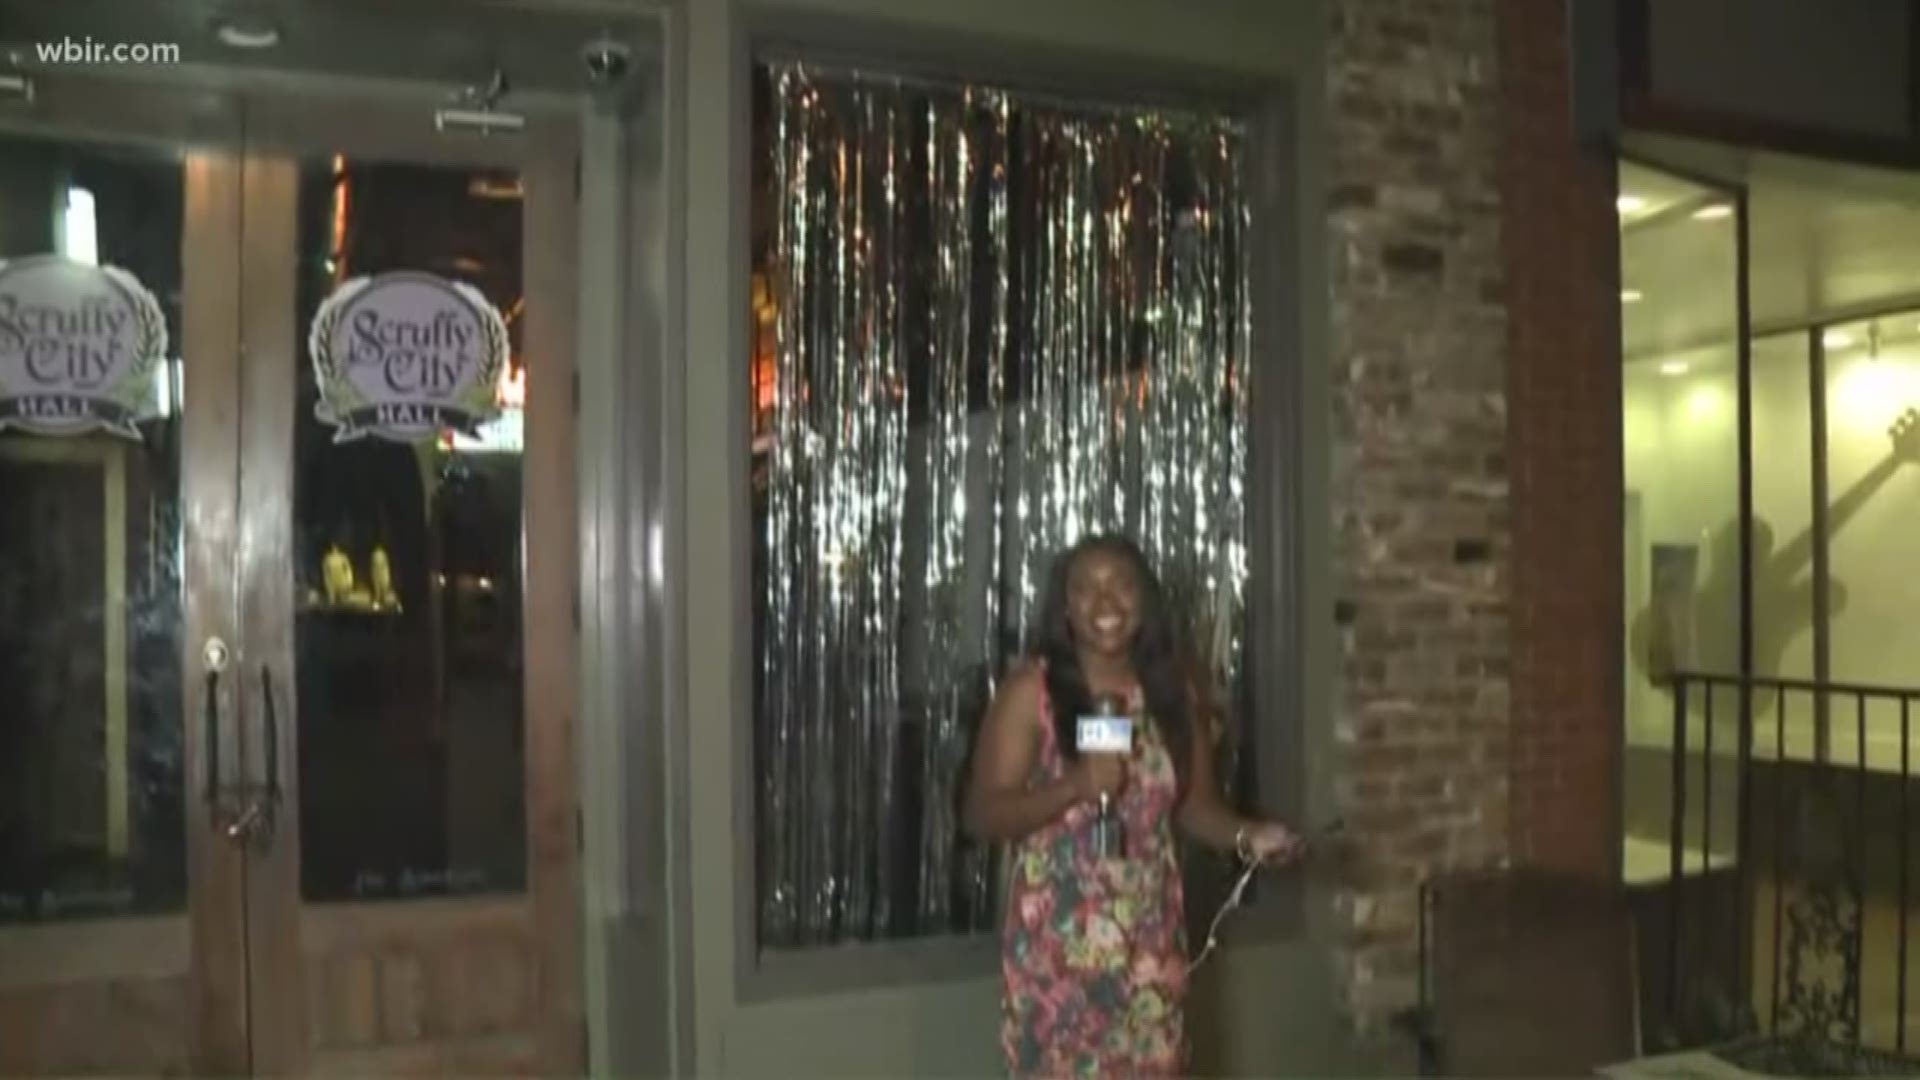 10News Reporter Yvonne Thomas hits some notes in her headlines!